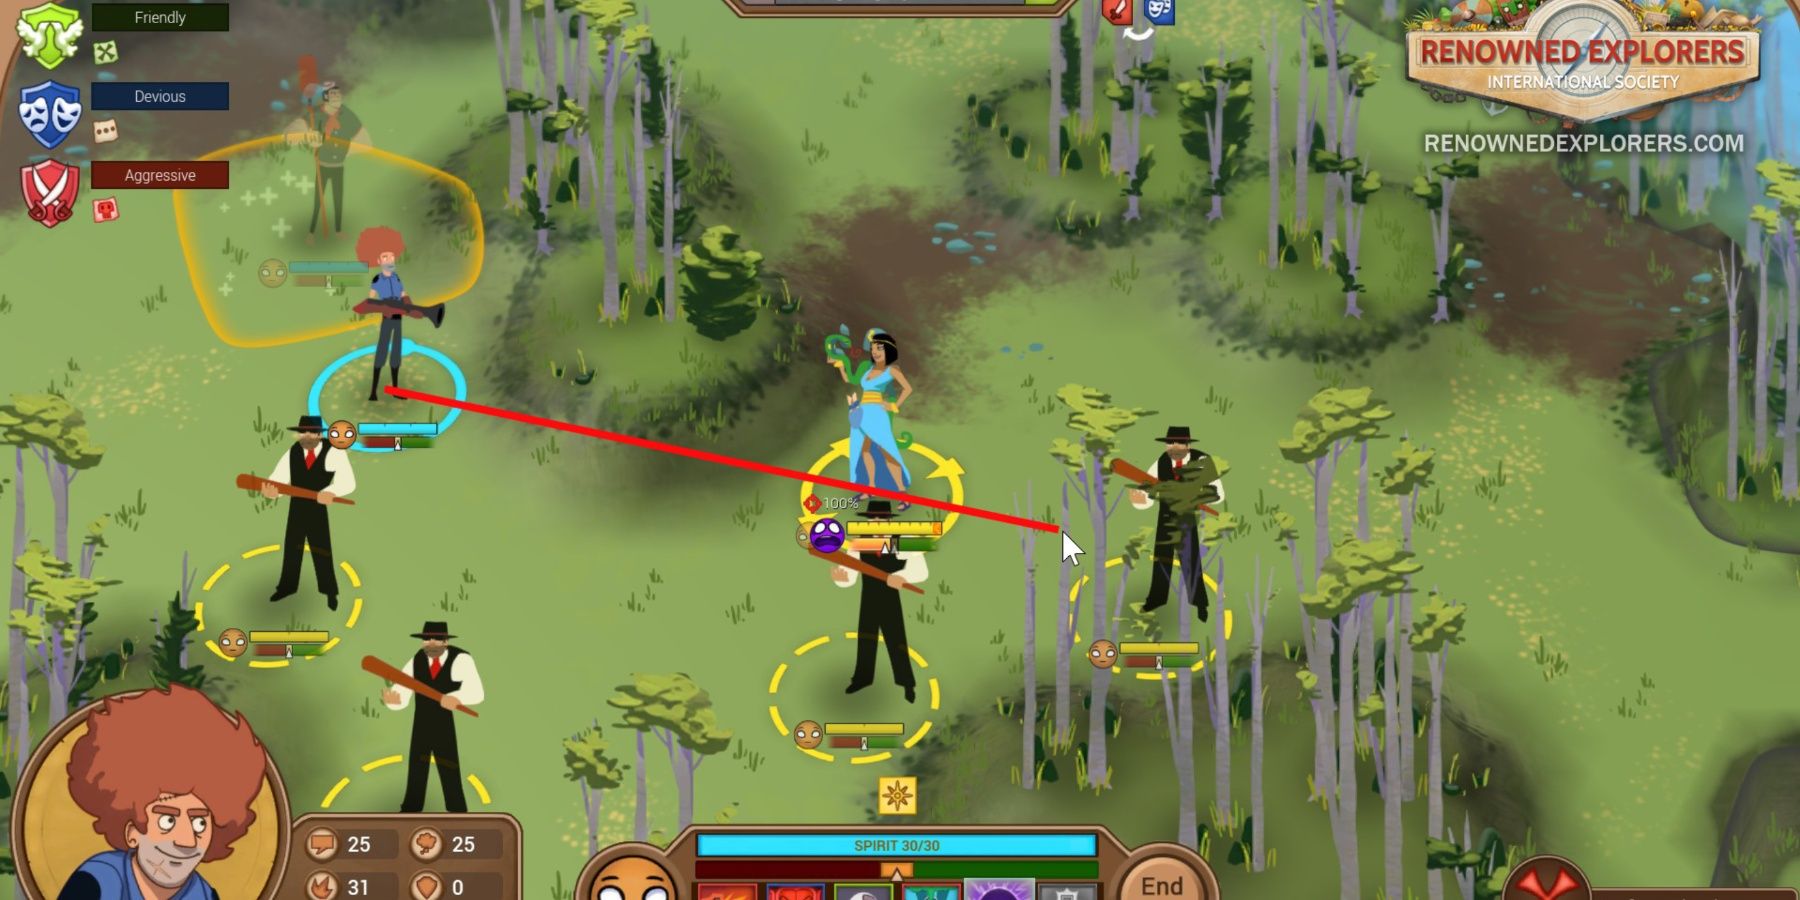 Animated characters on a map in Renowned Explorers: International Society